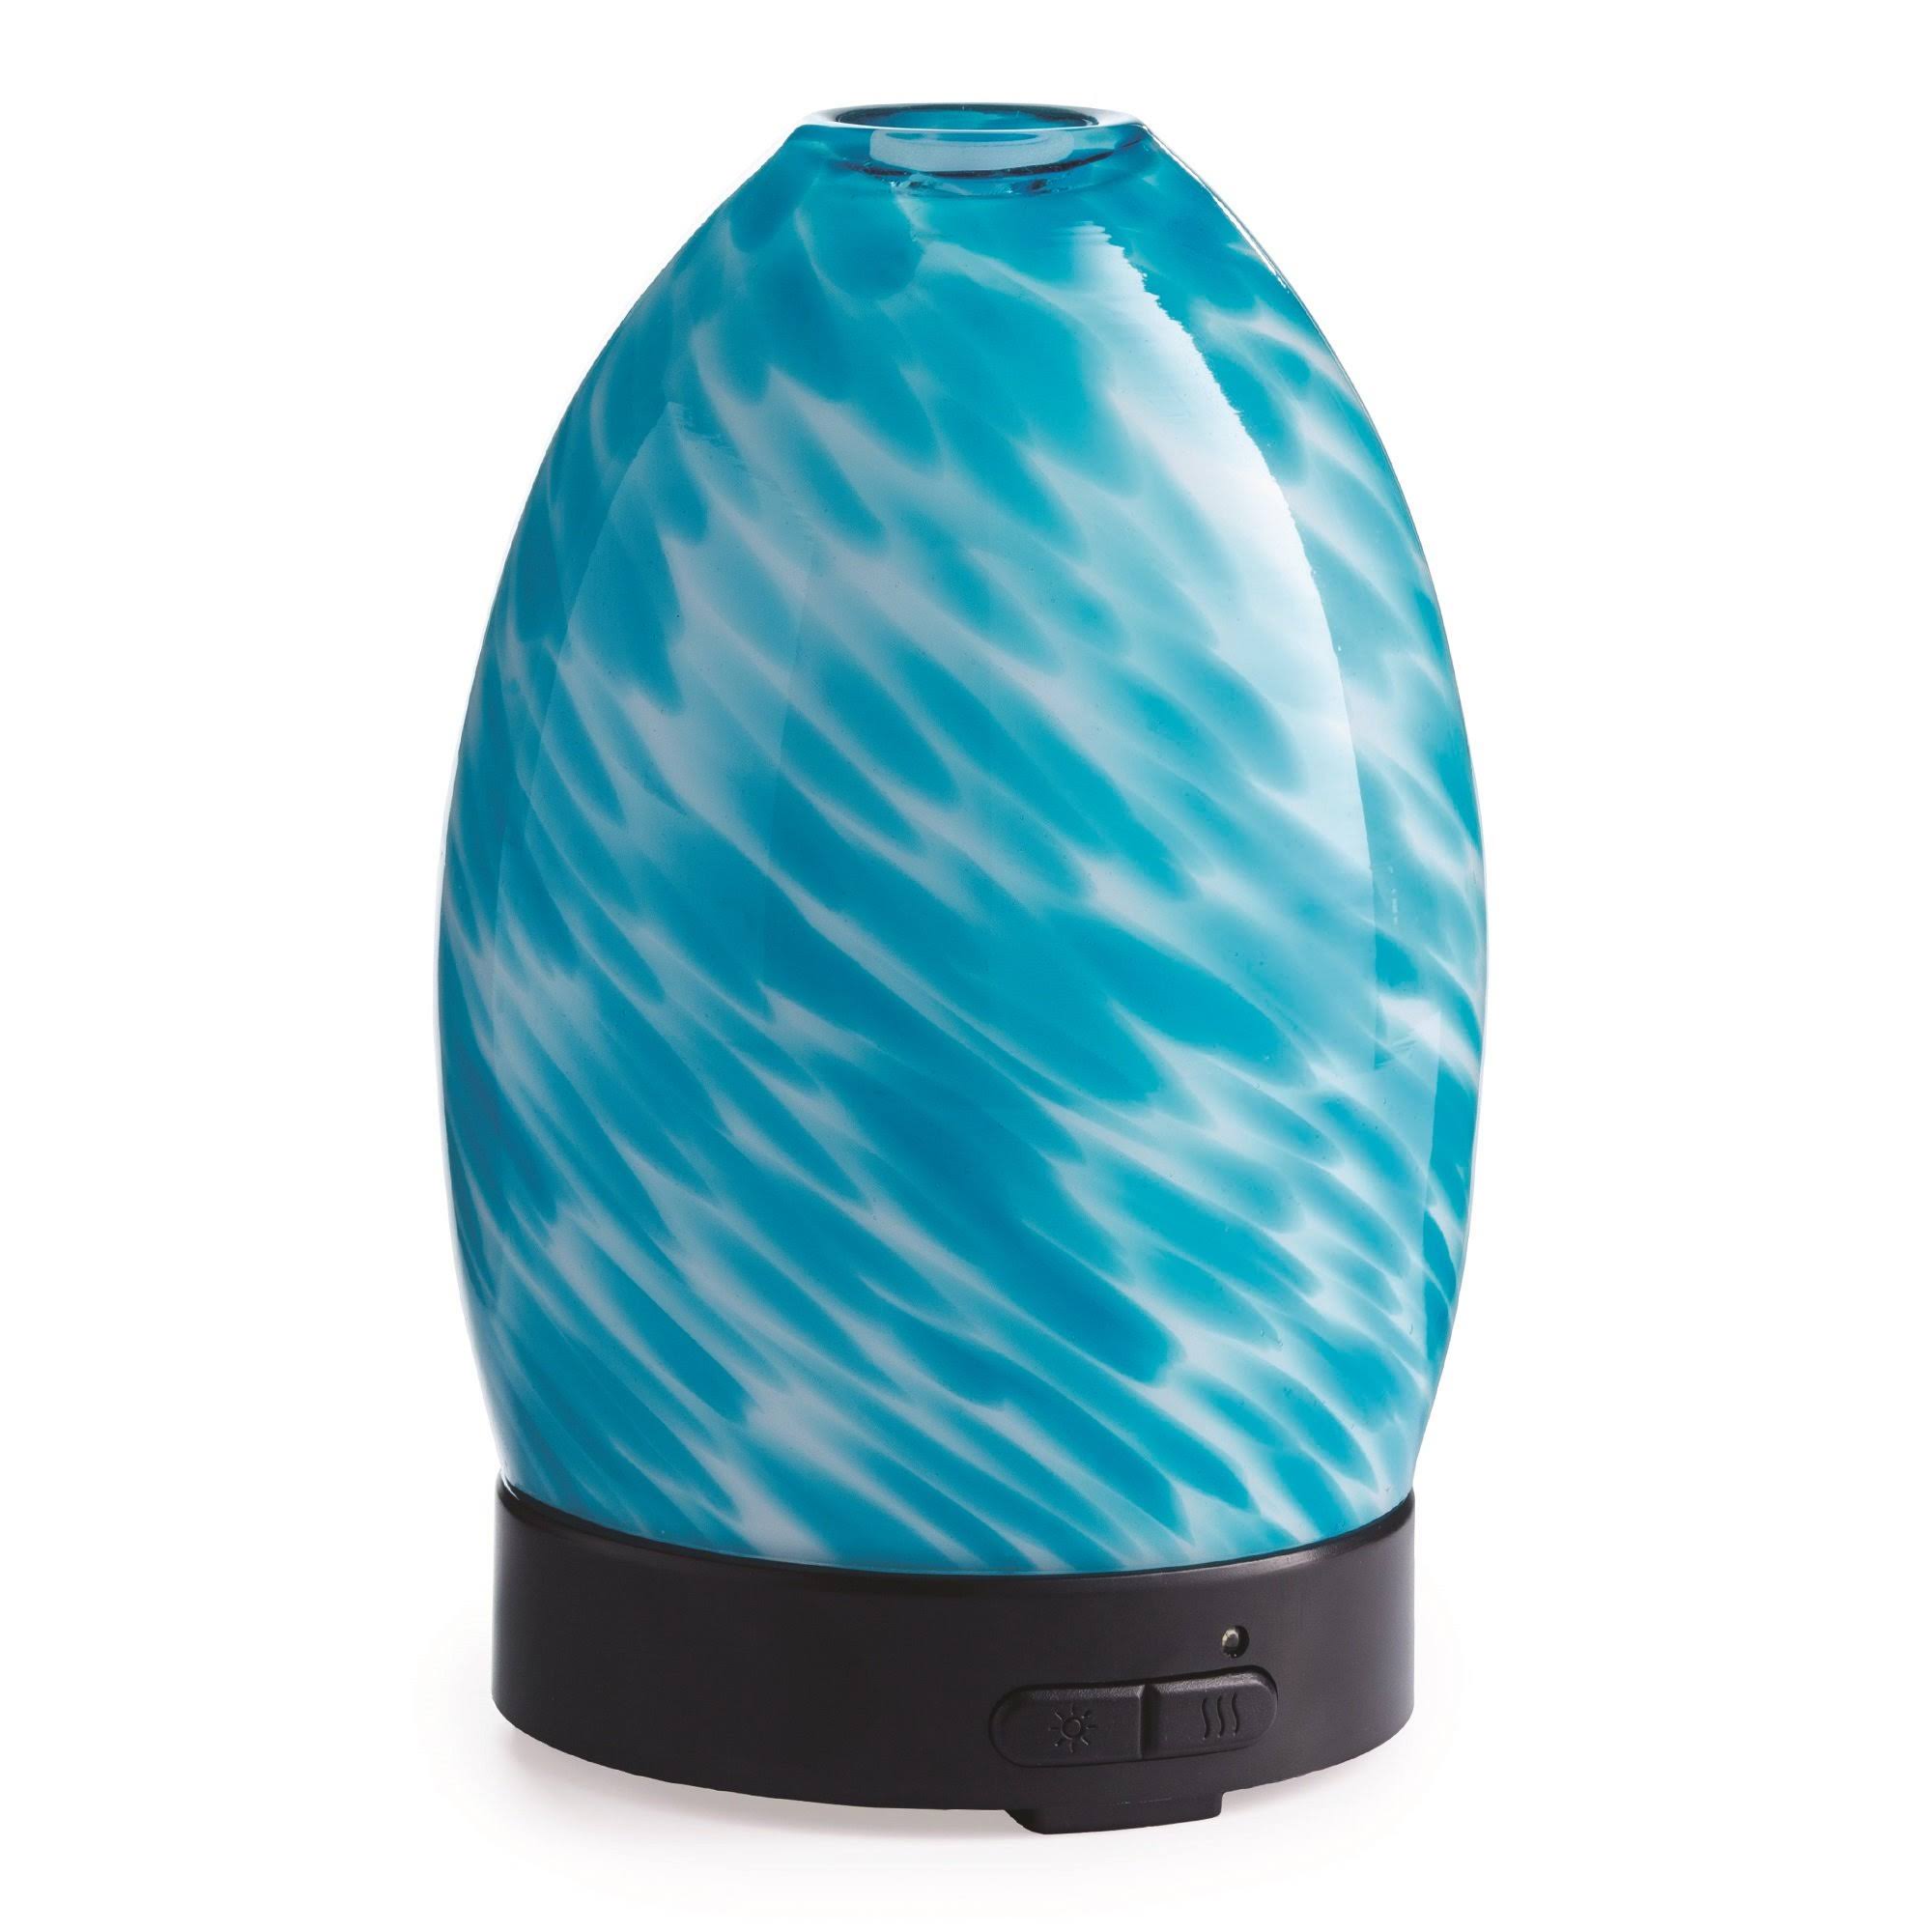 Airomé Aegean Sea Hand Blown Glass Essential Oil Diffuser 100 ml Humidifying Ultrasonic Aromatherapy Diffuser 8 Colorful LED Lights